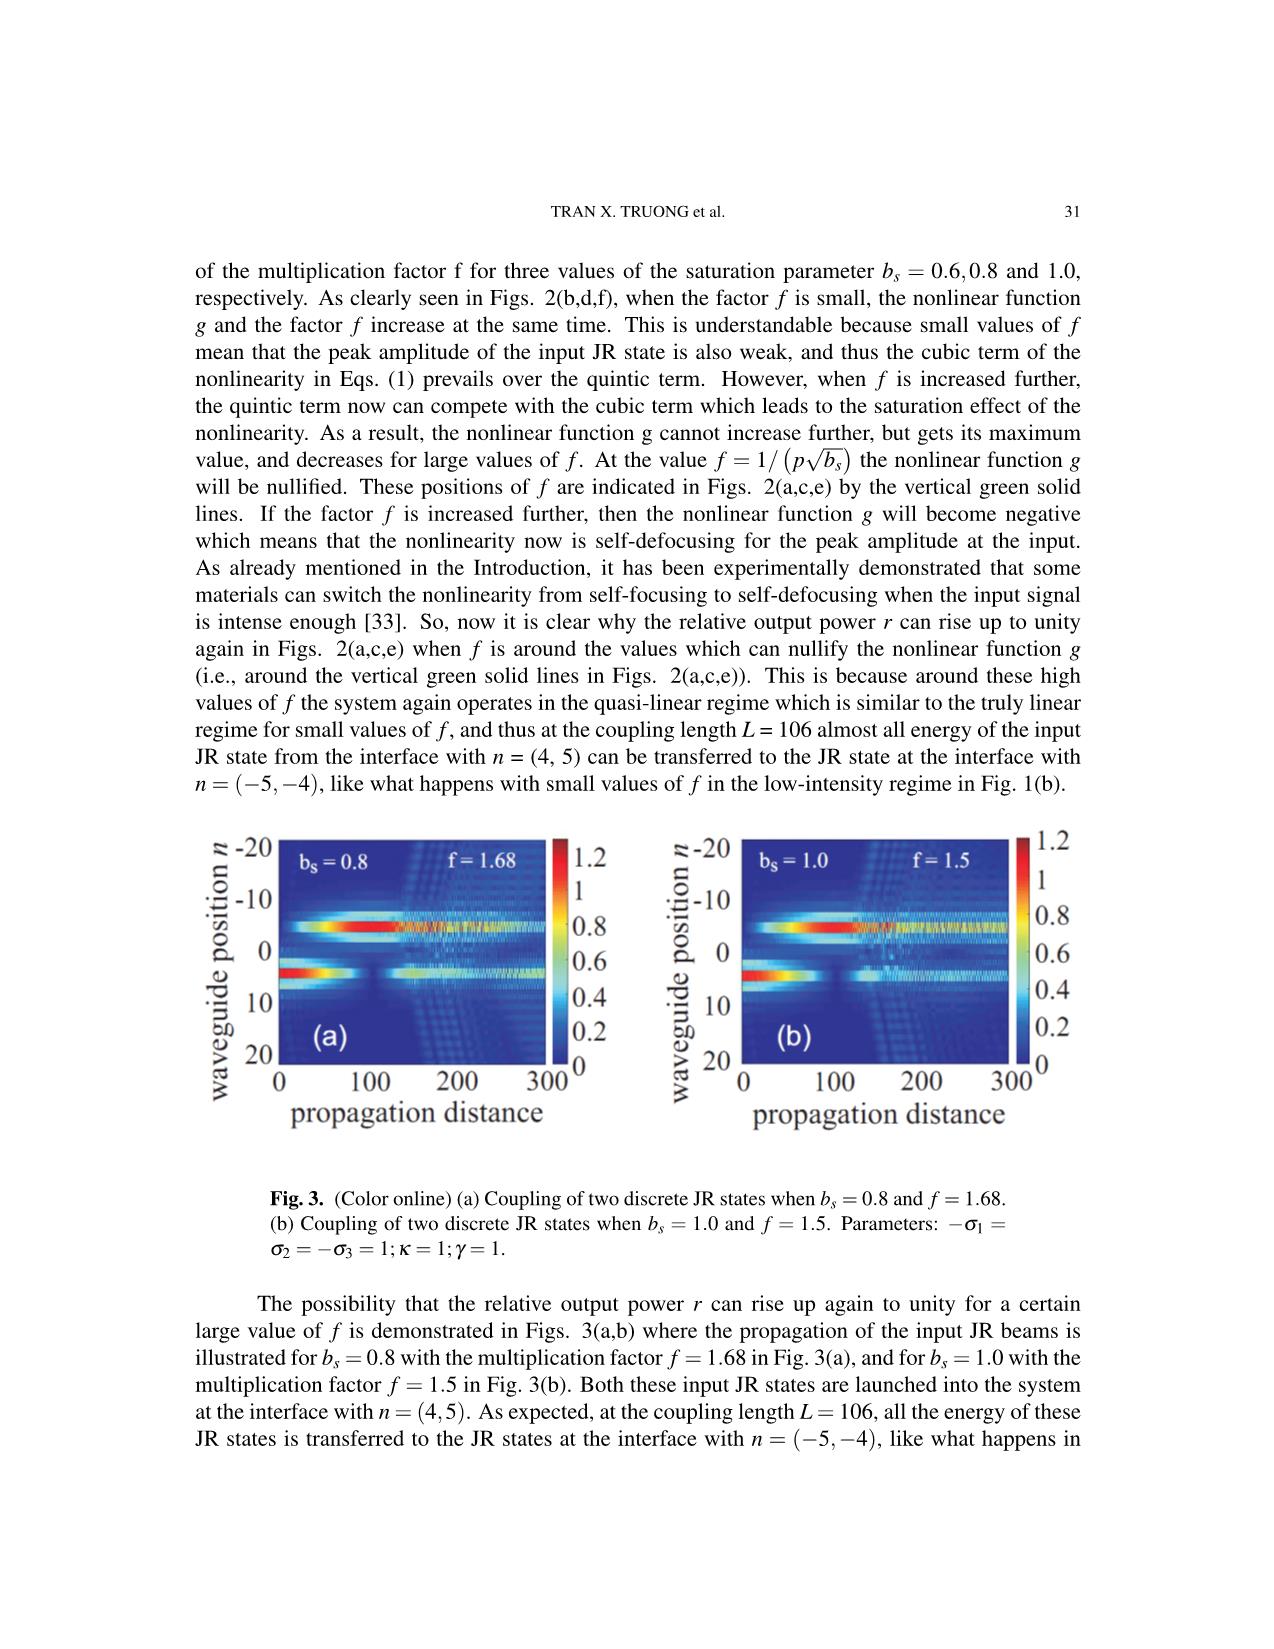 Interaction between two jackiw - rebbi states in interfaced binary waveguide arrays with cubic - quintic nonlinearity trang 9